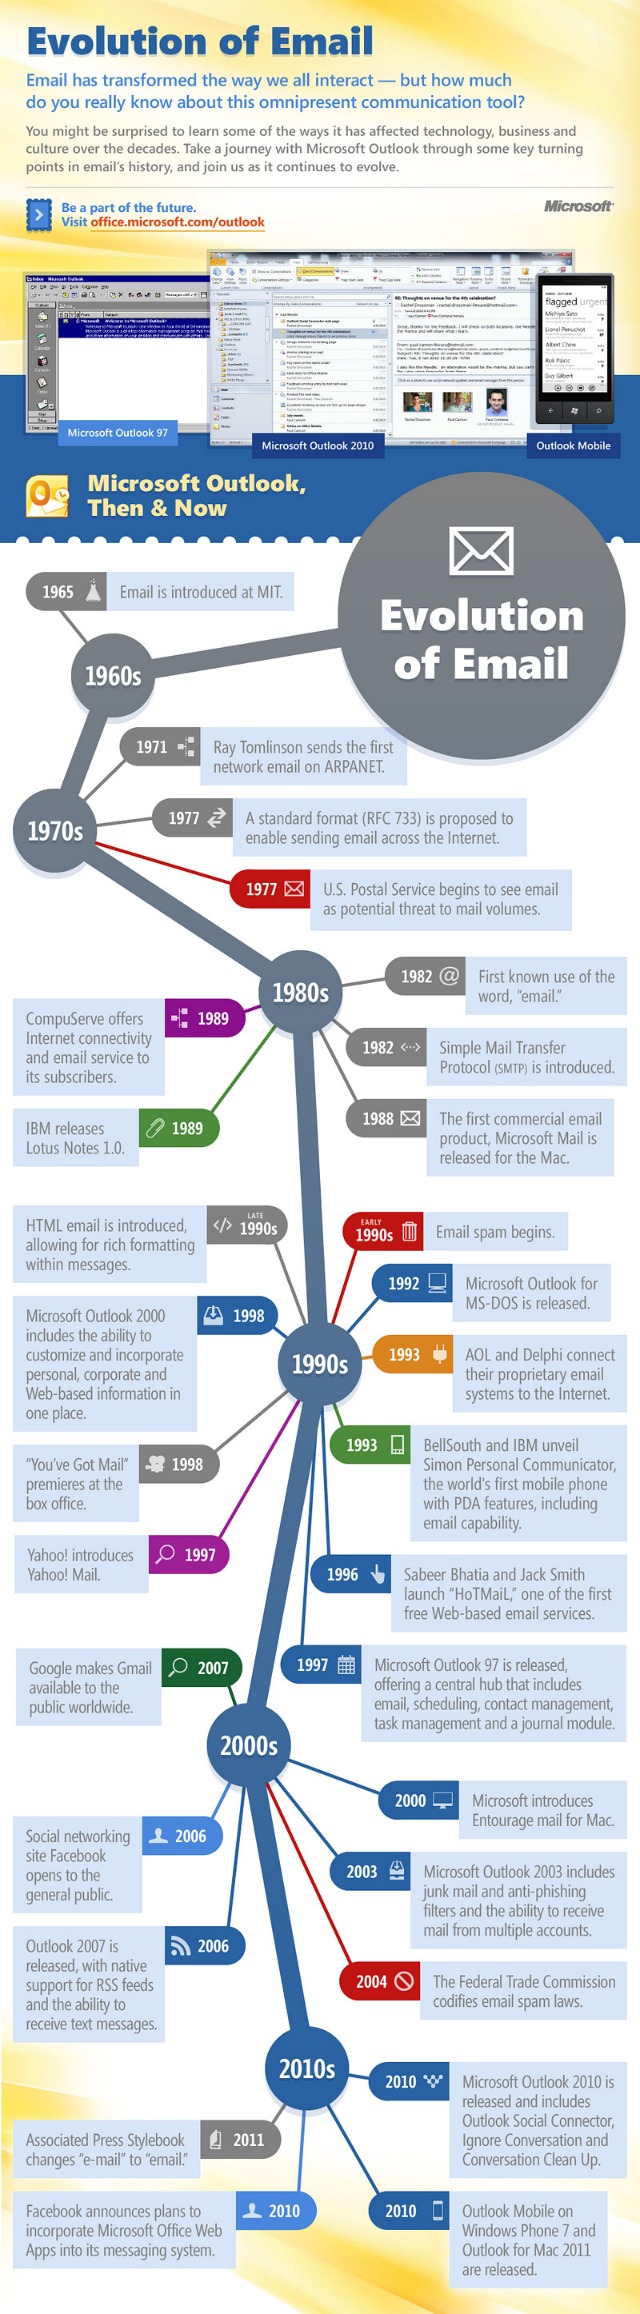 Evolution of Email Infographic